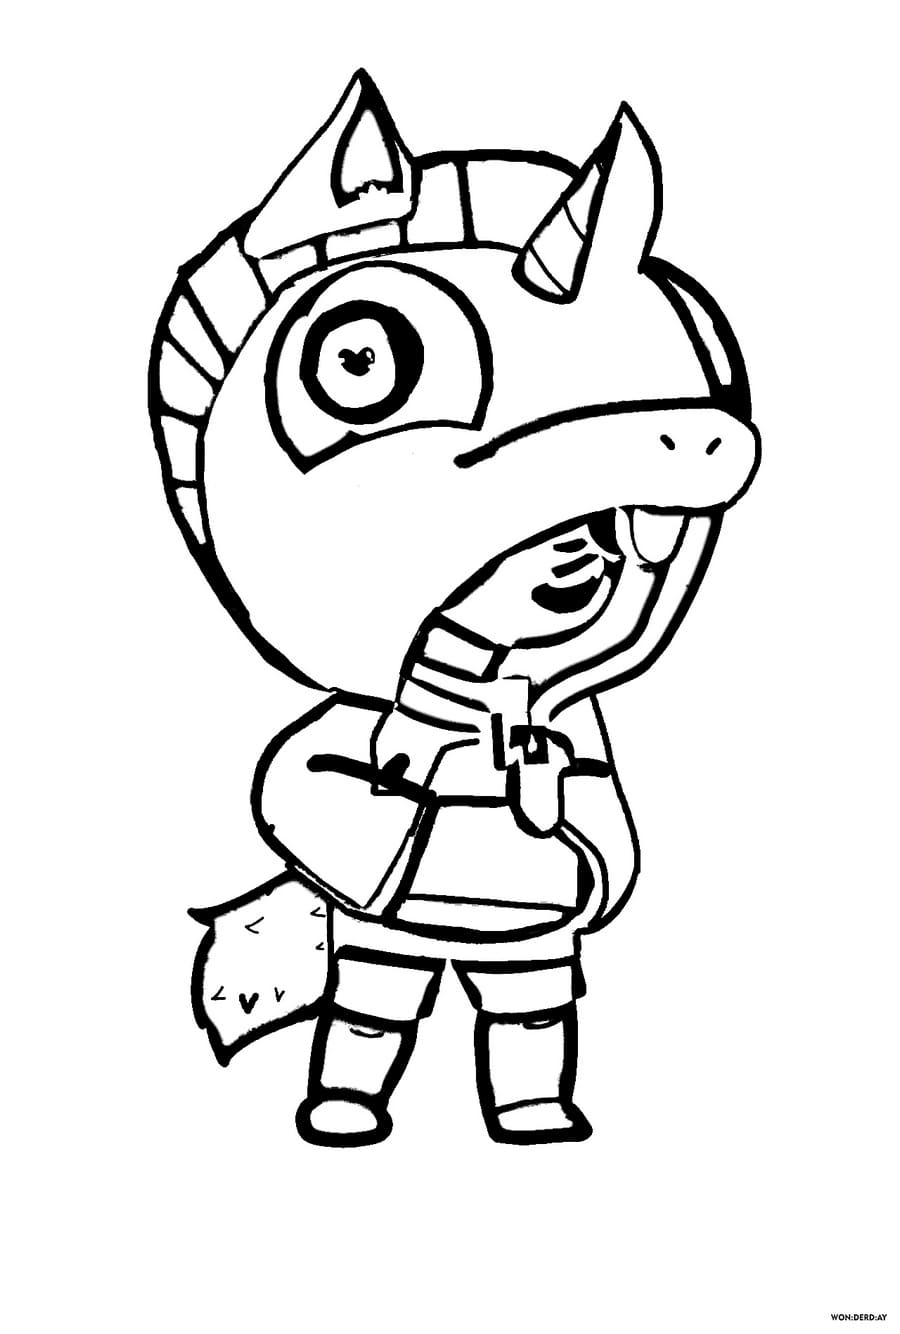 Leon Brawl Stars Coloring Pages Print For Free Wonder Day Coloring Pages For Children And Adults - leon dinosaurio brawl stars para colorear